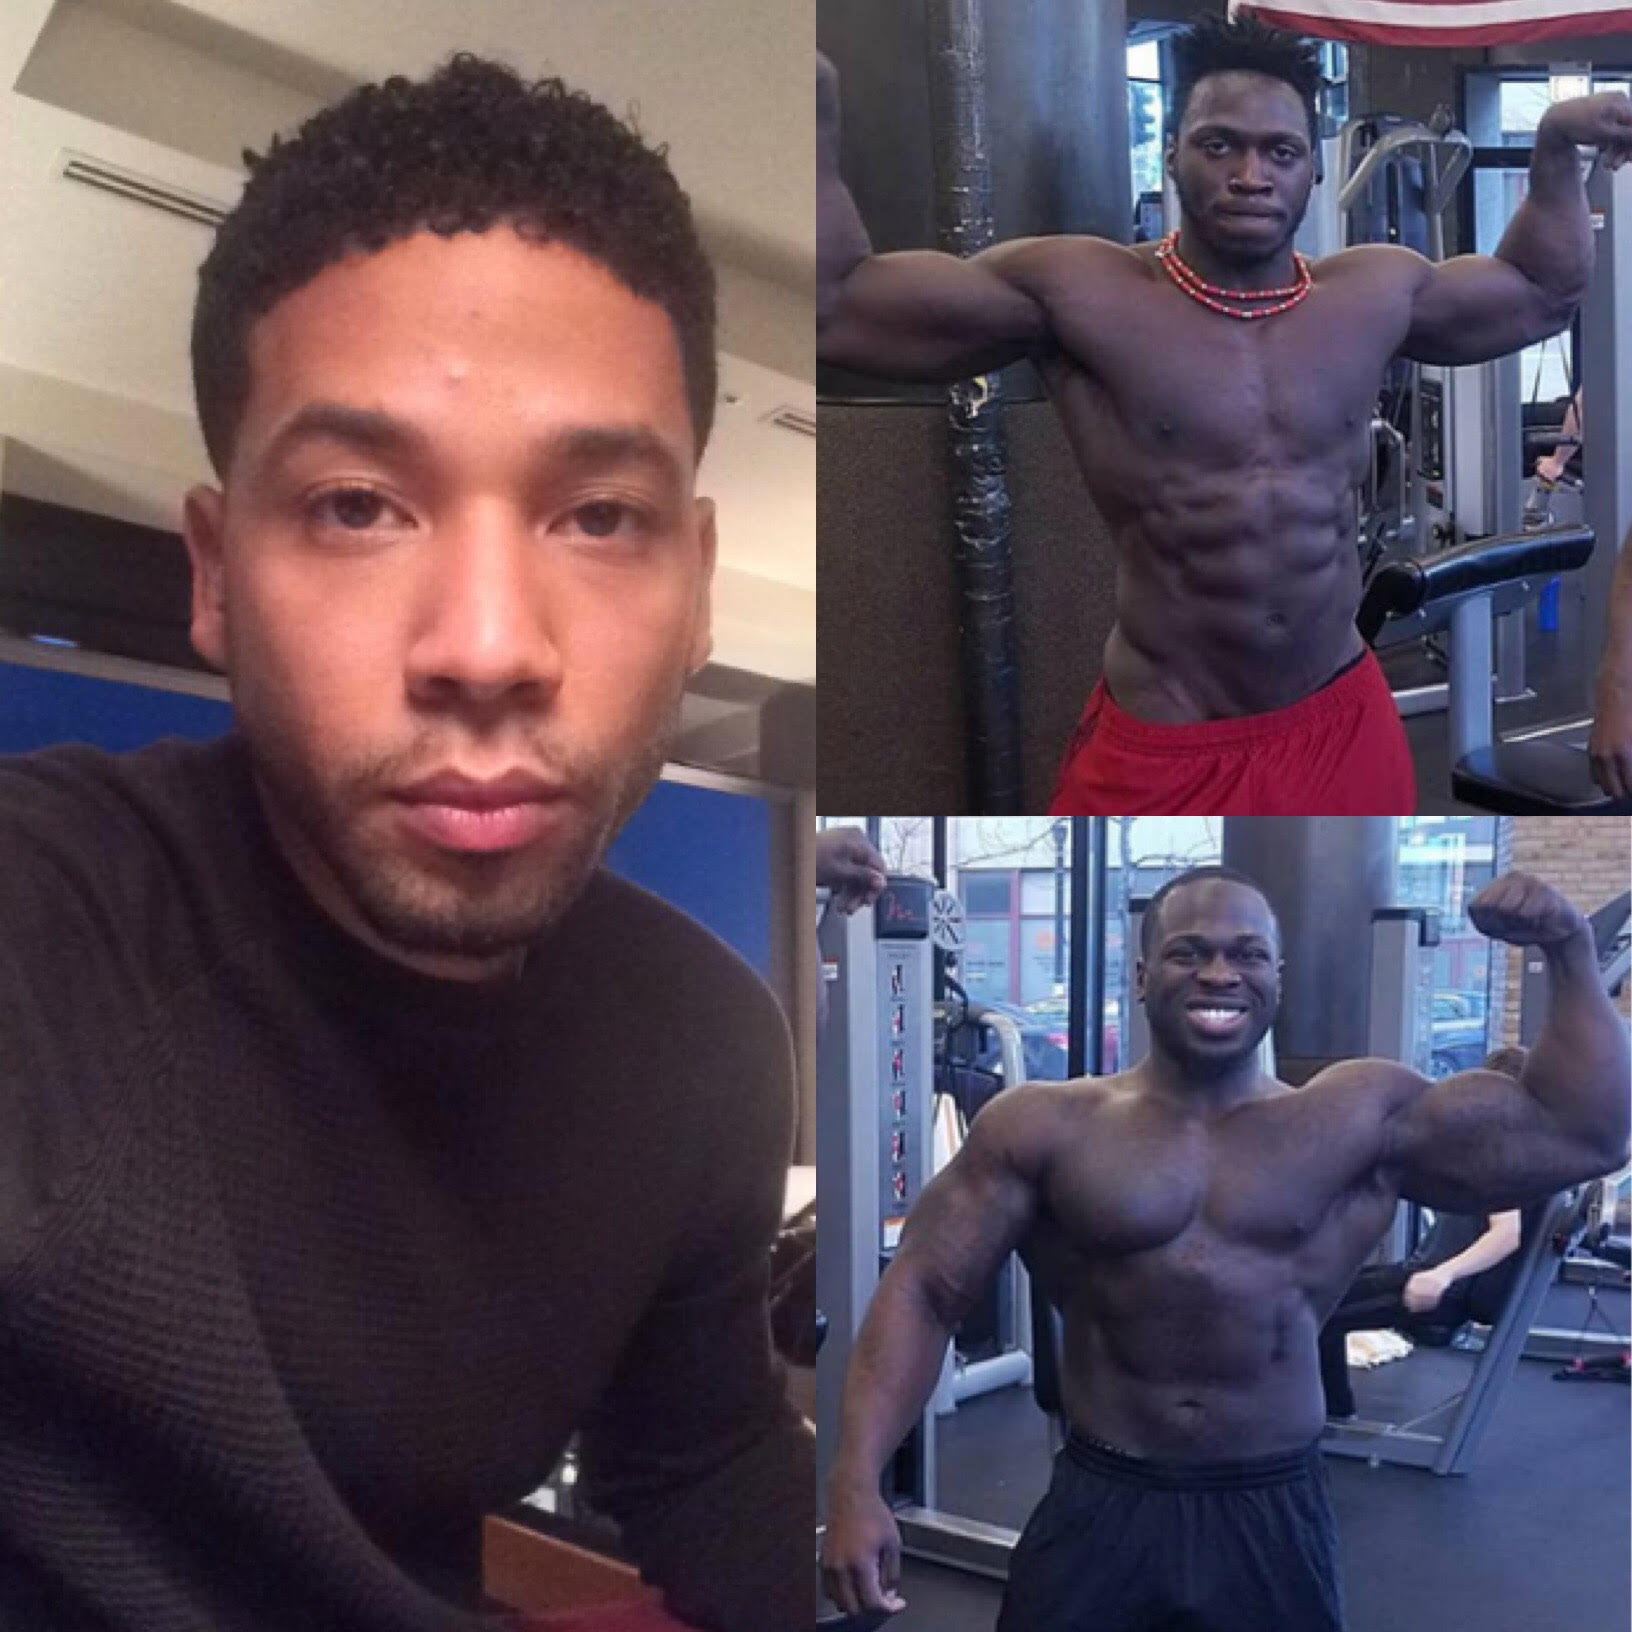 Jussie Smollett - Nigerian Brothers Claim They Rehearsed Attack With Empire Star ...